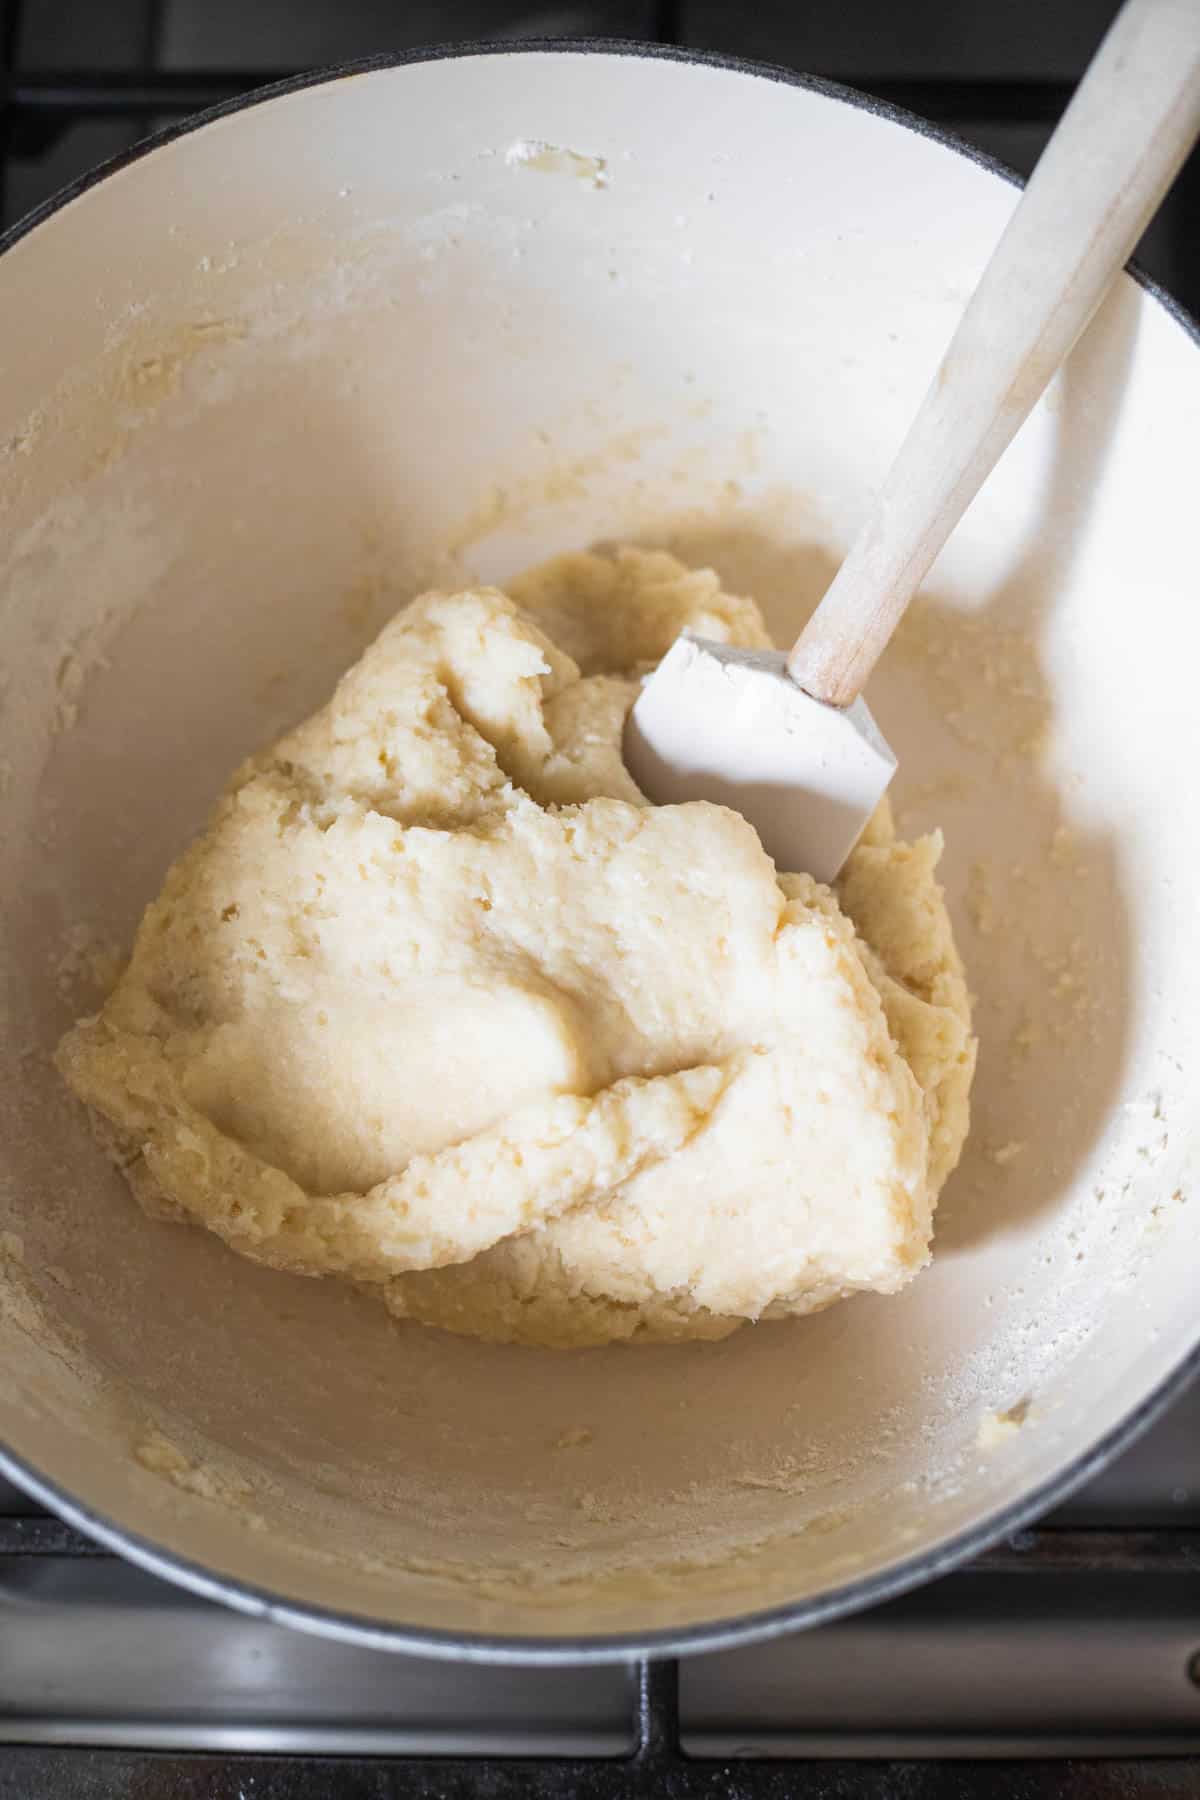 cooked dough for rissois in a pan on the stovetop